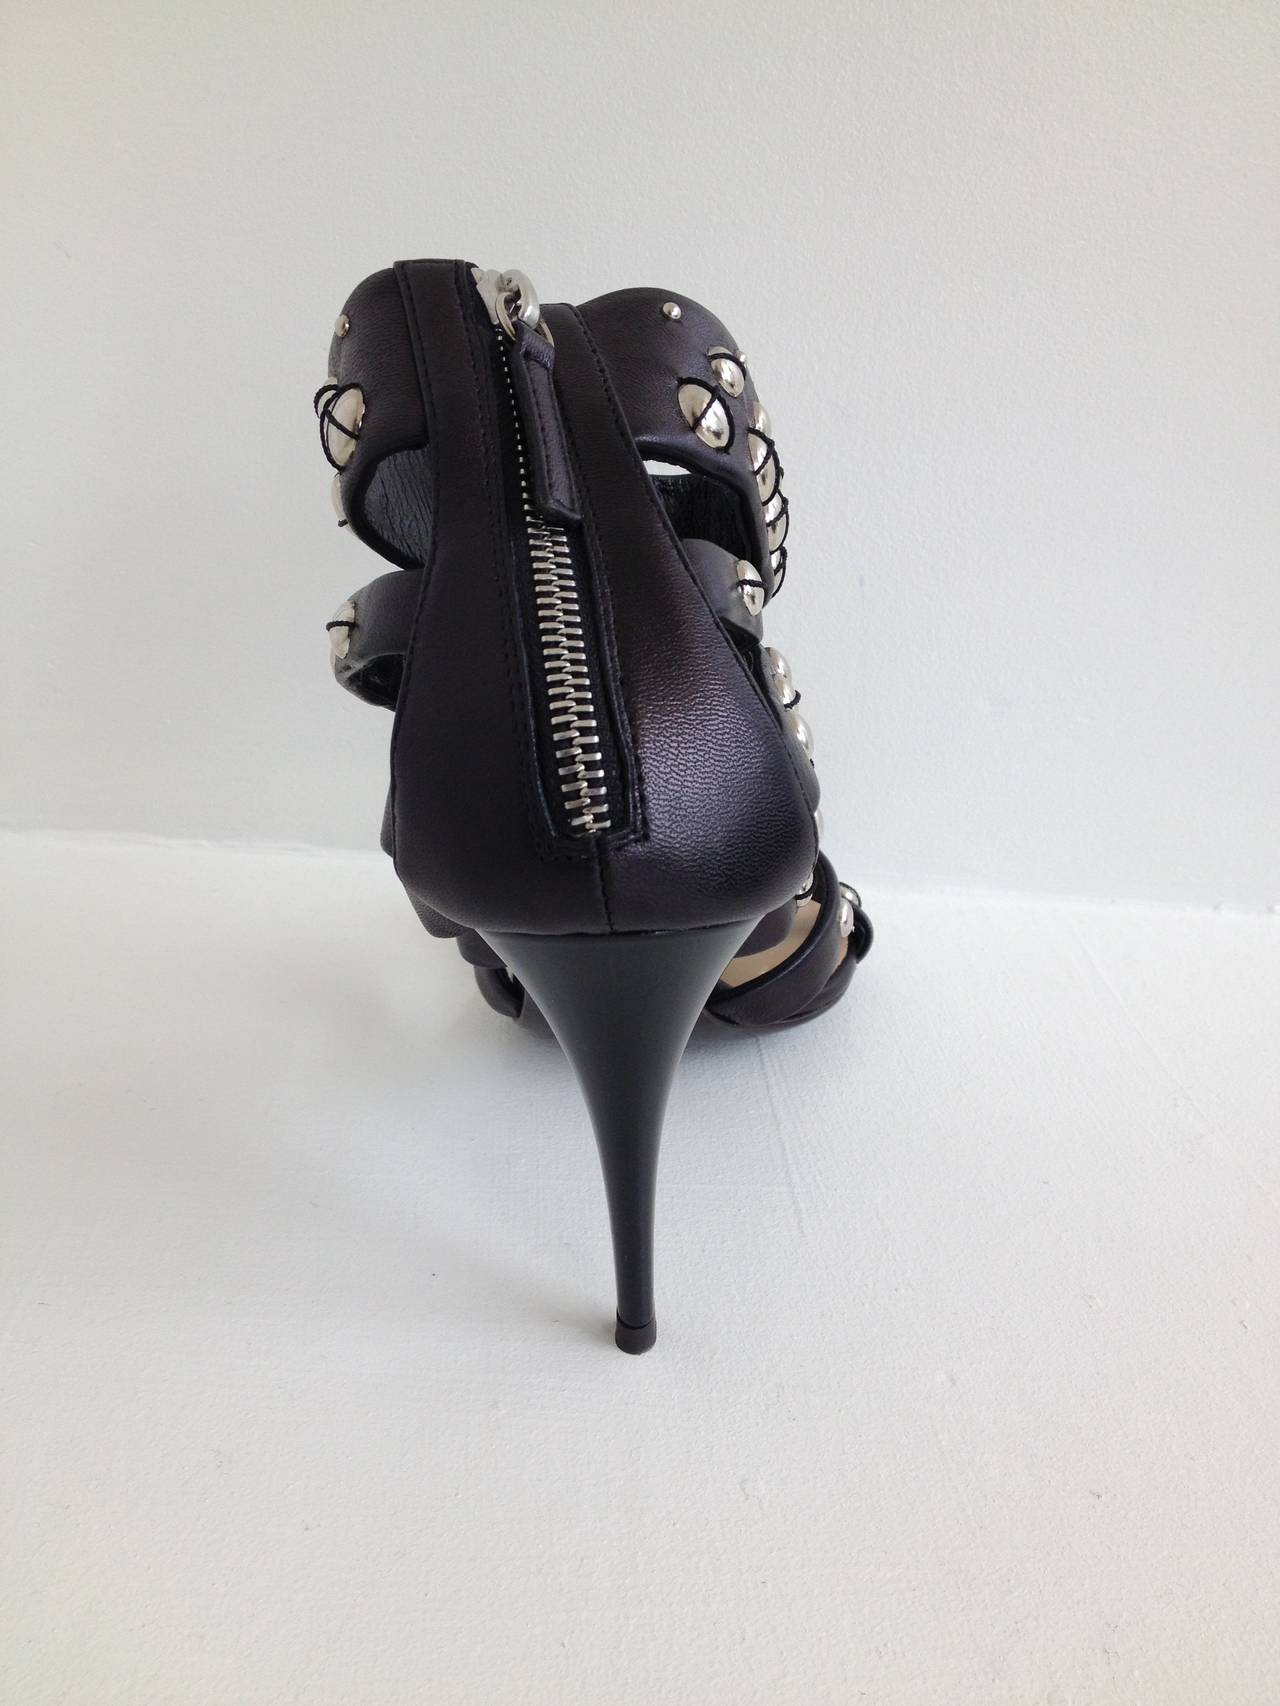 Heavy metal glamour. These Giuseppe Zanotti heels are bold and edgy, with thick black leather straps punctuated with shiny silver round studs, some accented with black leather threads. The 3.75 inch heel is the perfect amount of height. We love the